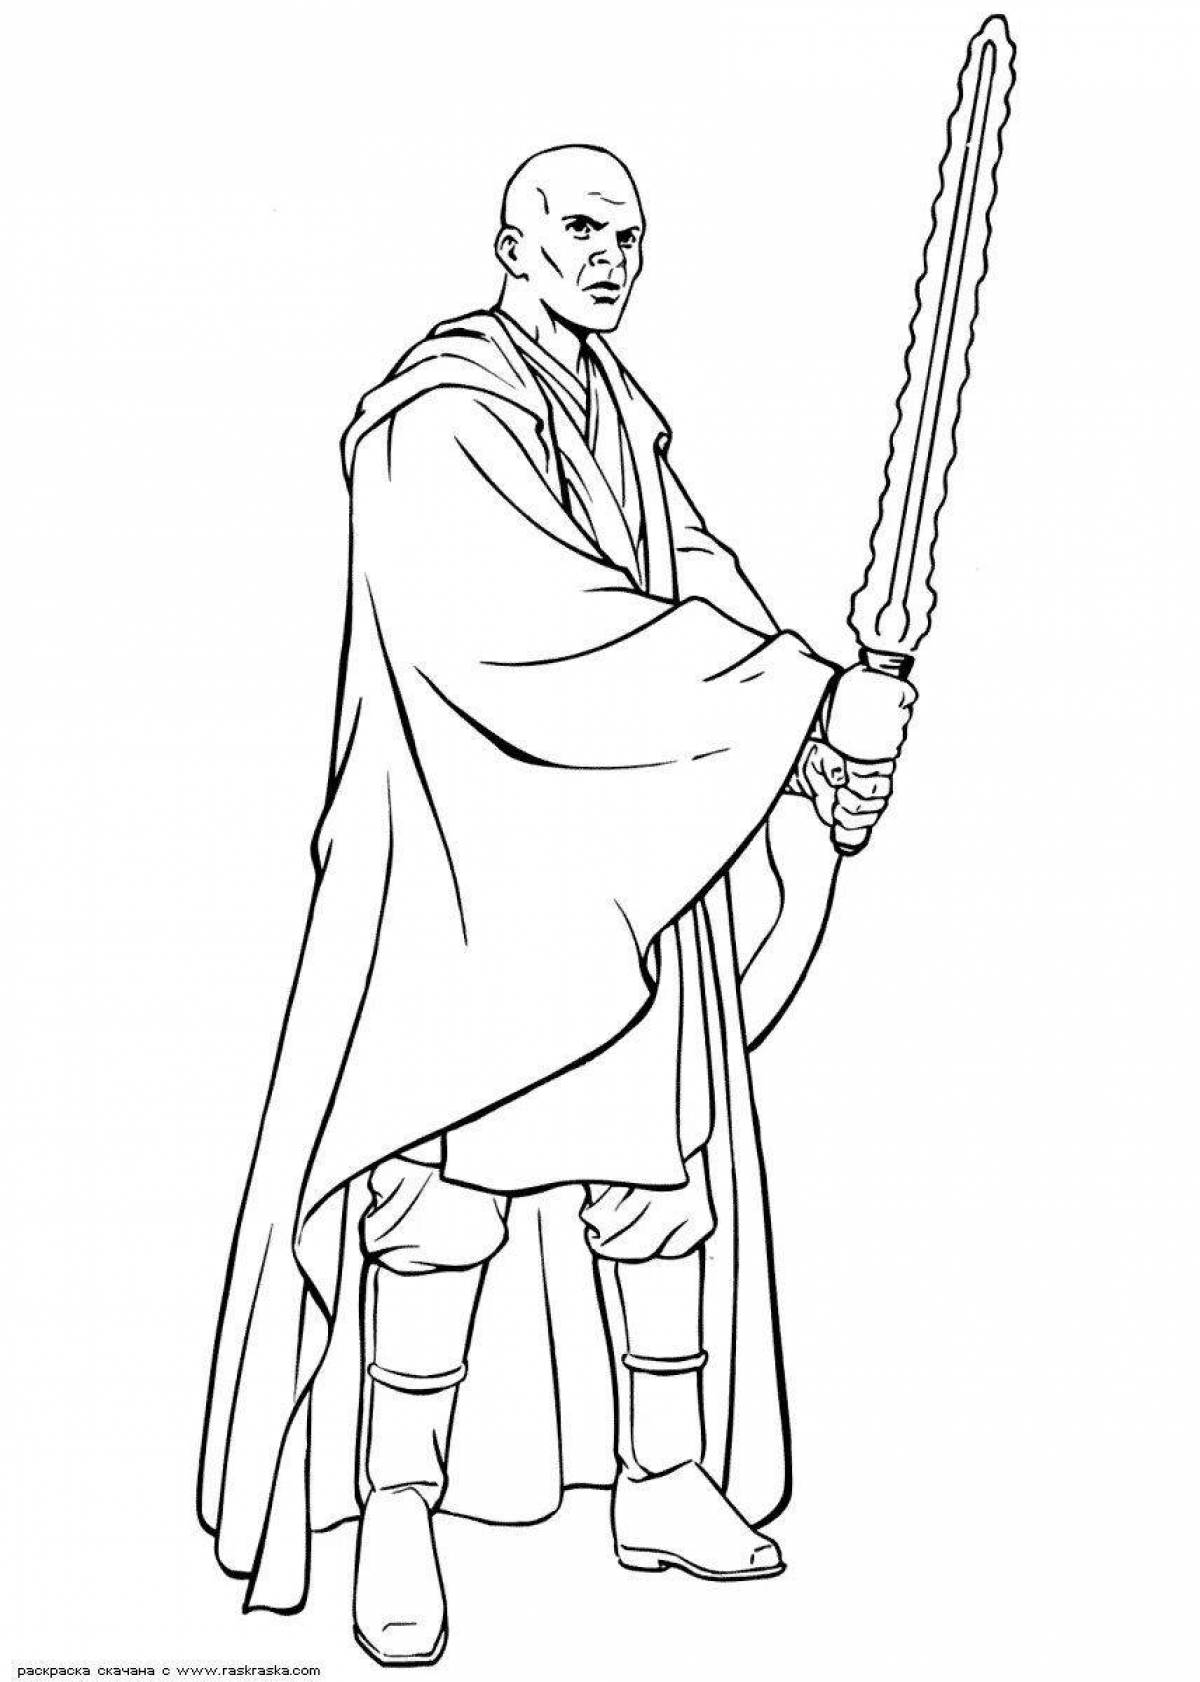 Luminous star wars coloring pages for kids